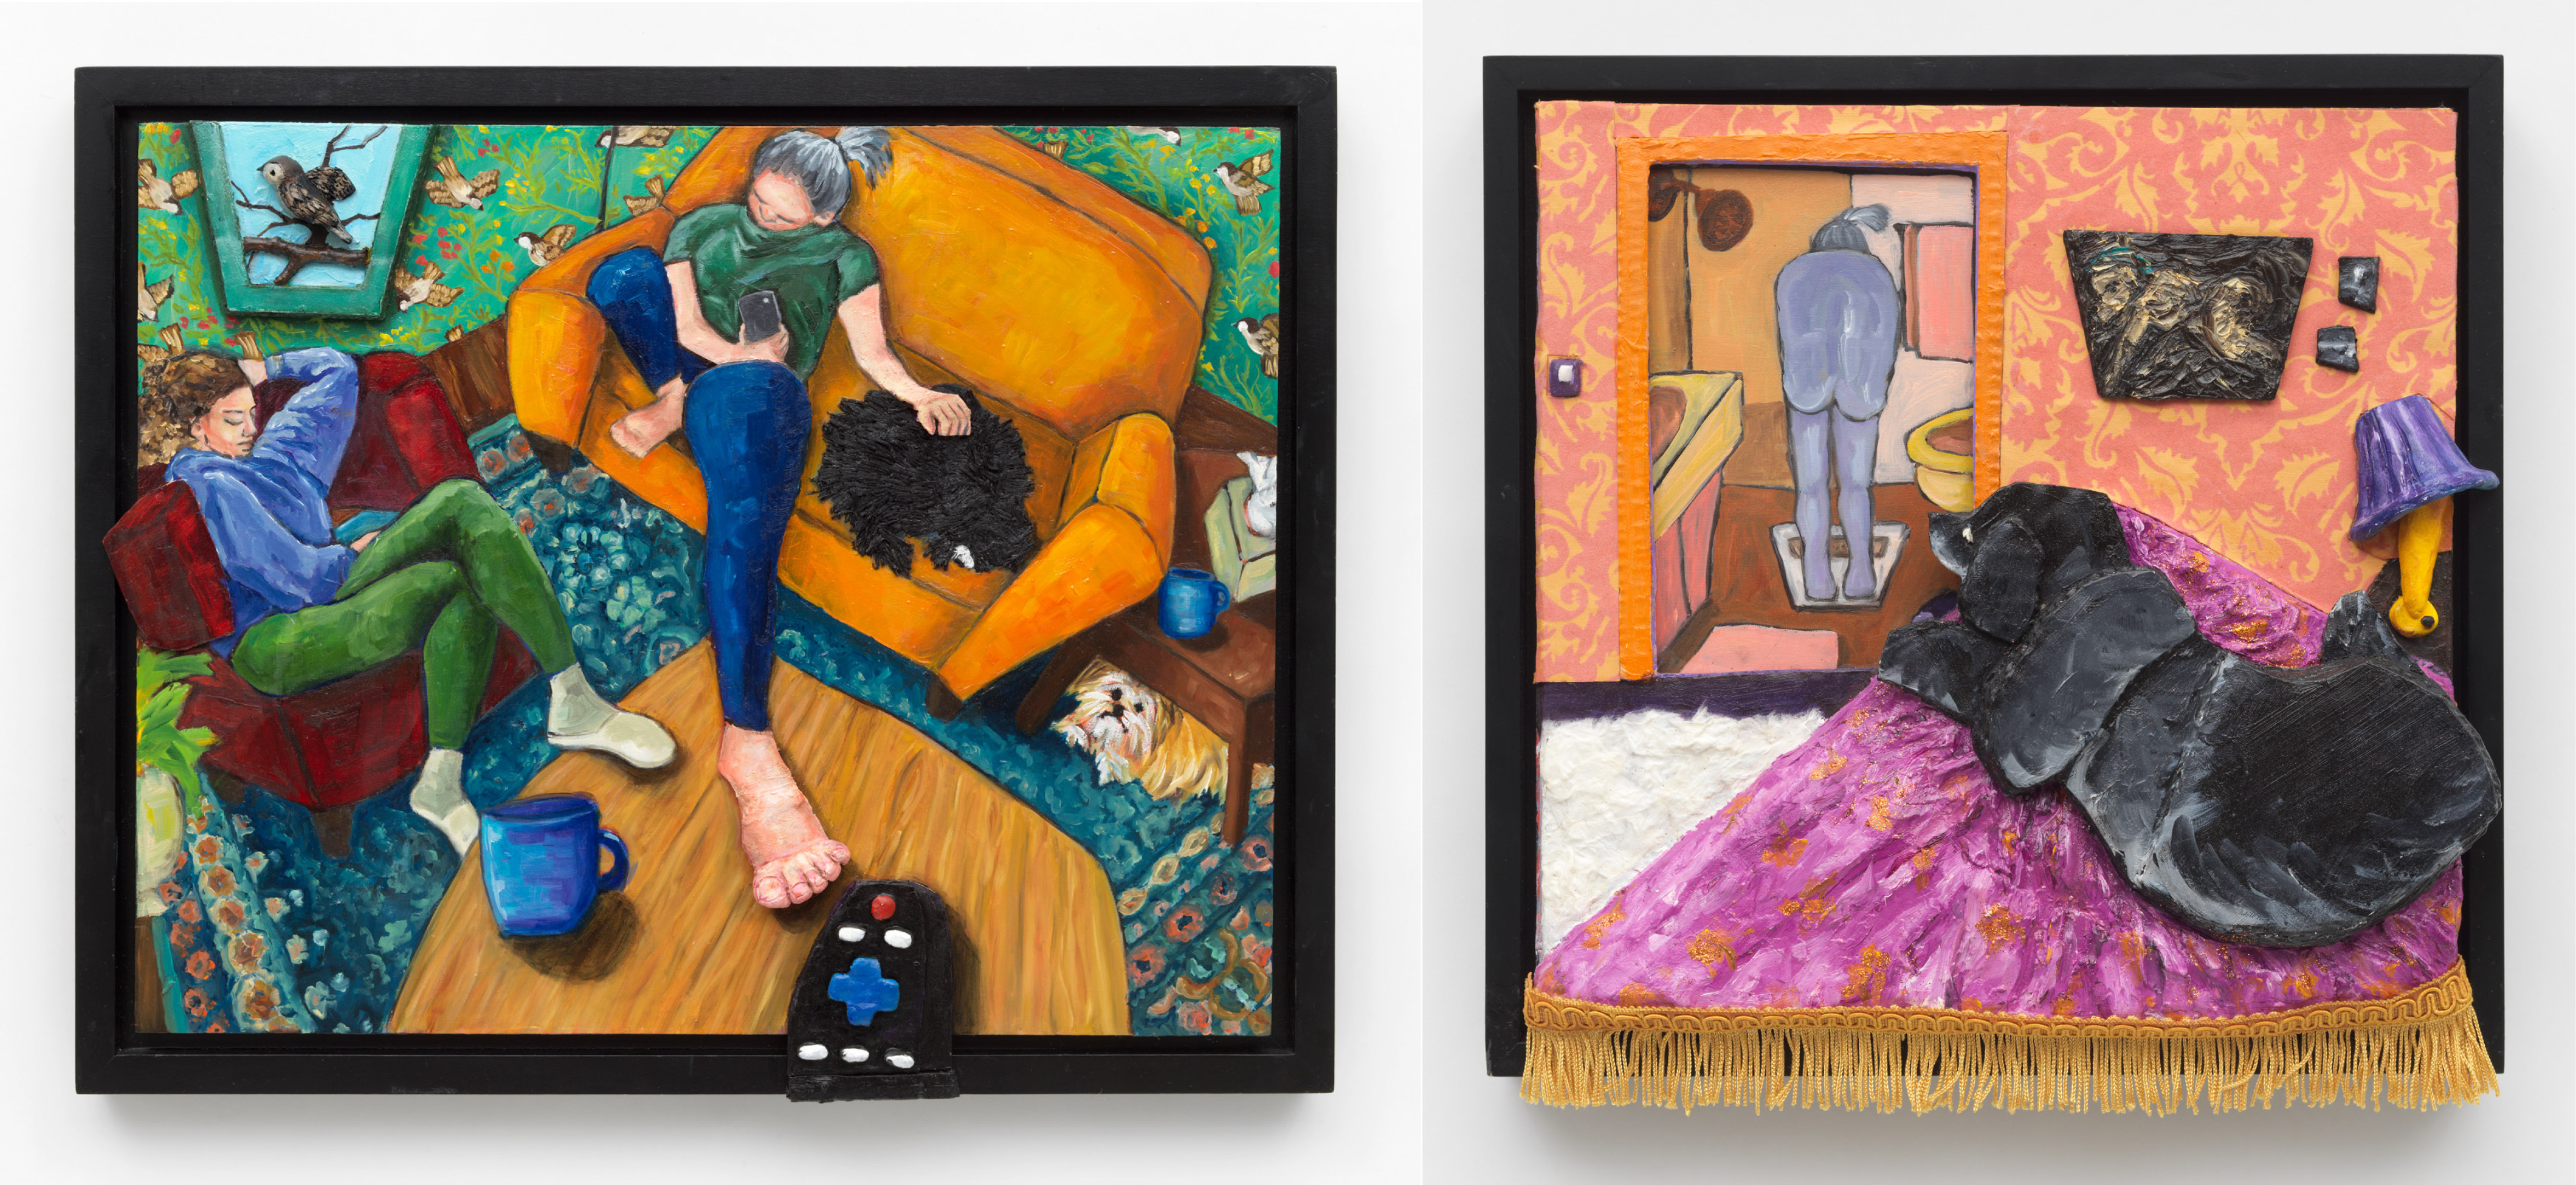 Exhibition header image featuring works by Kathy Halper: at left, "Mother & Daughter"; at right, "Weigh In"